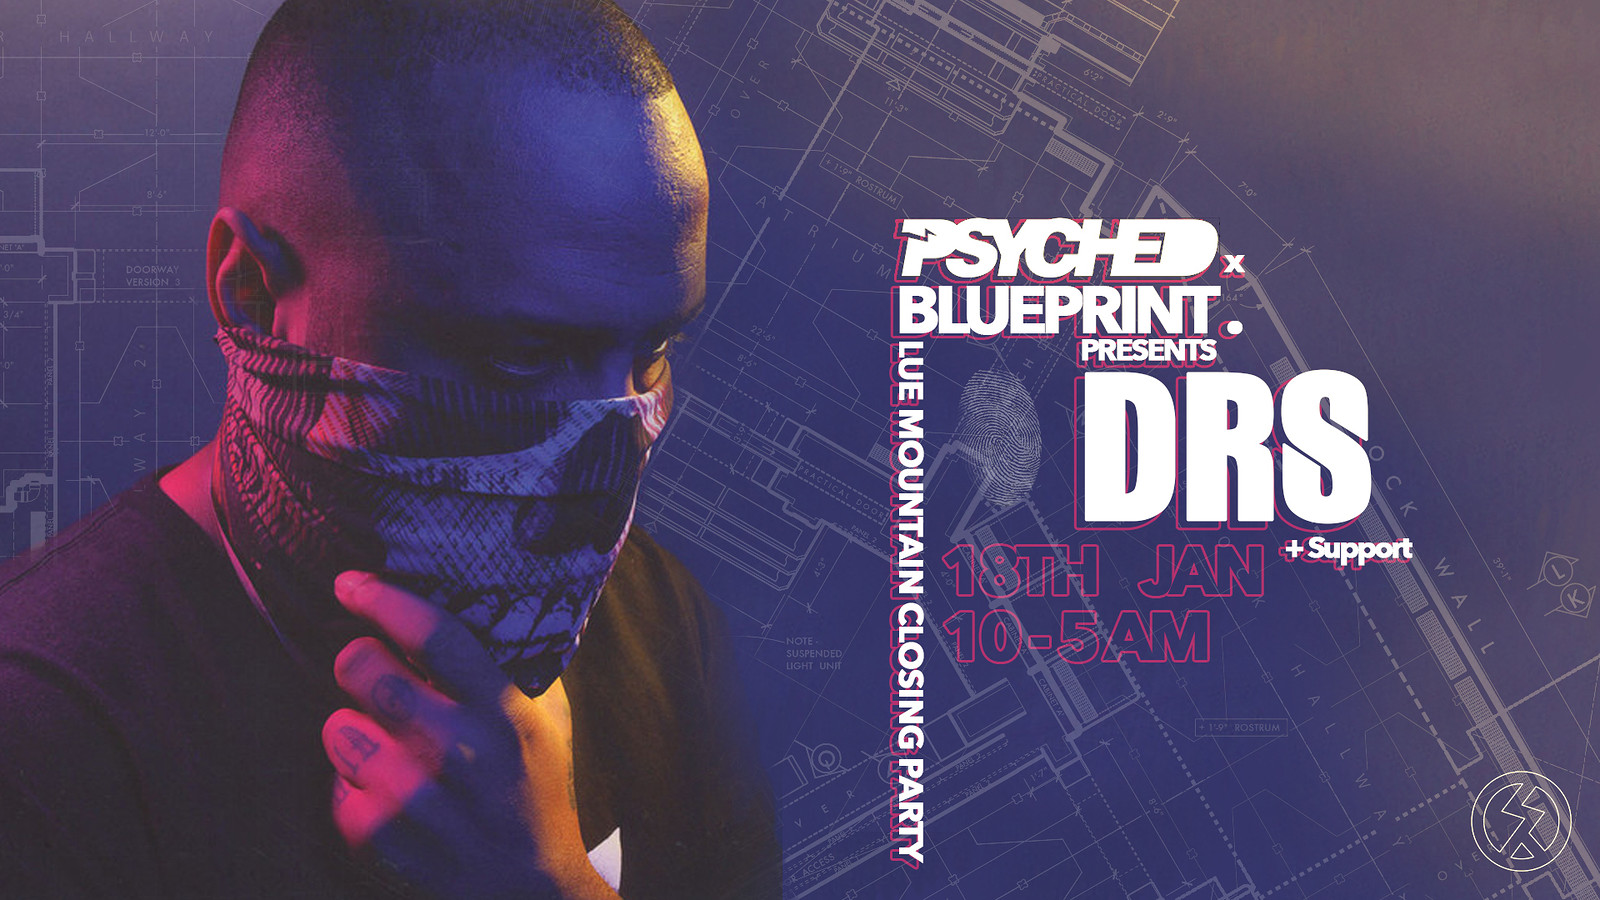 Psyched x Blueprint Present DRS at Blue Mountain